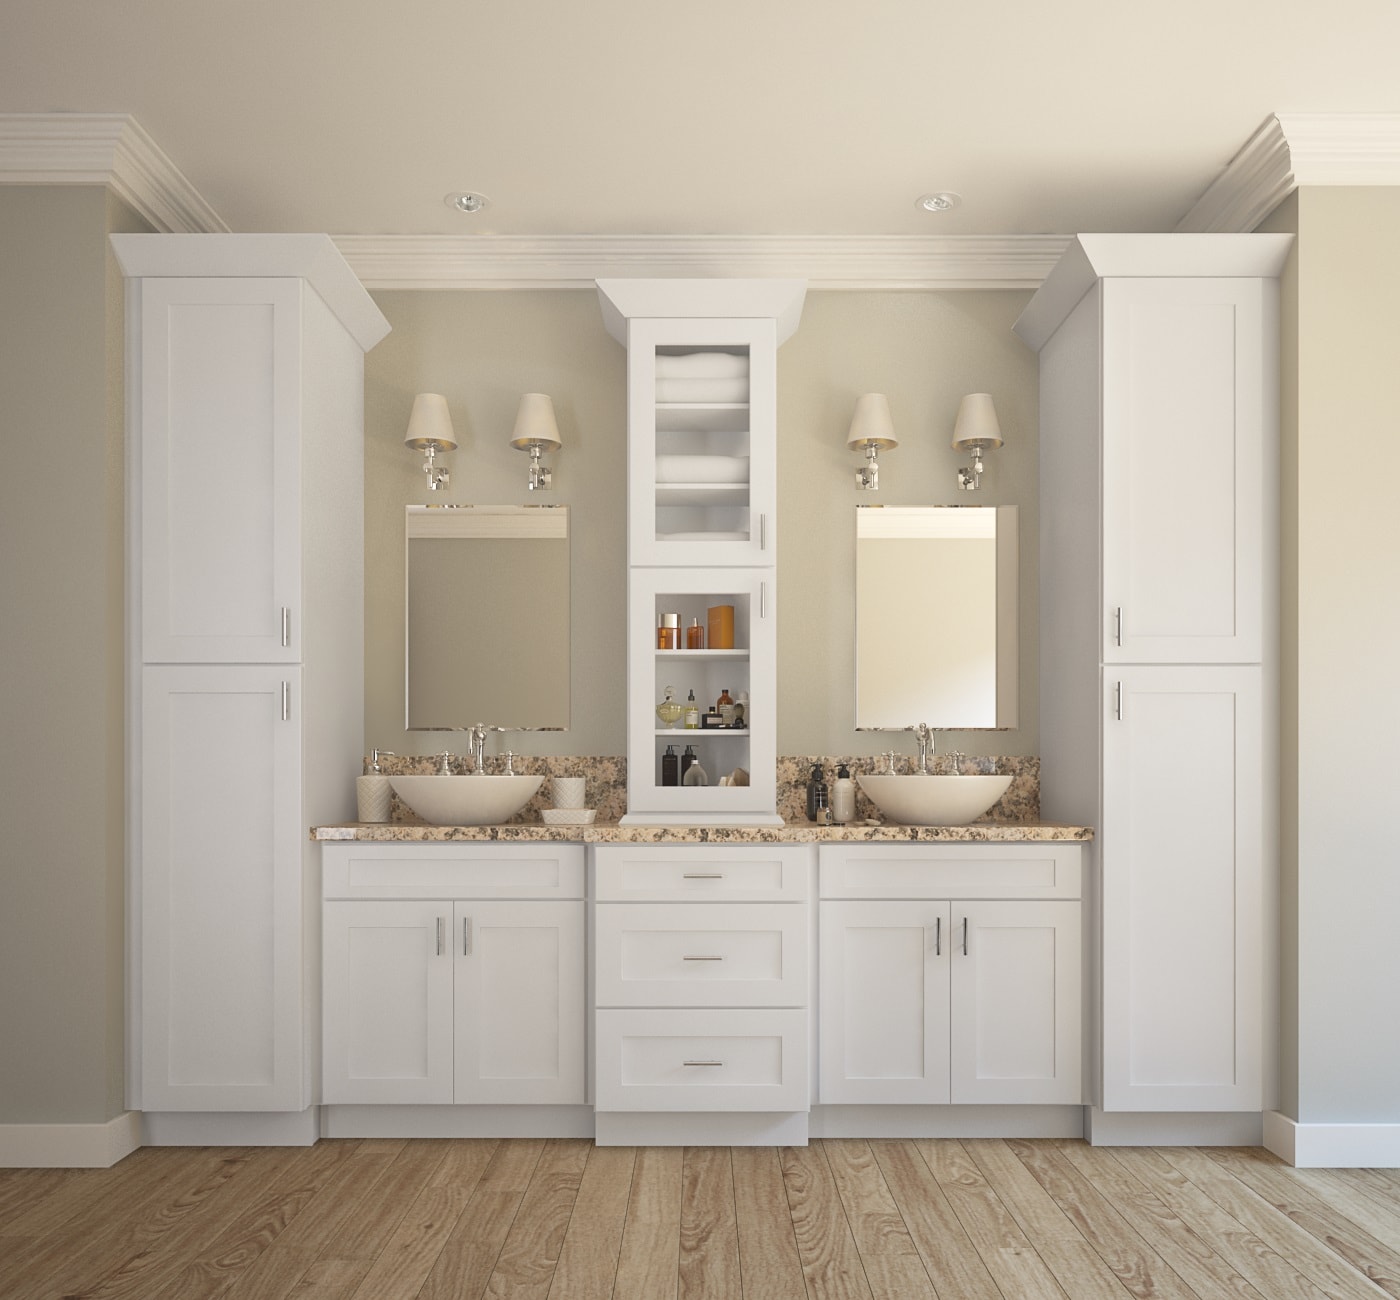 Bathroom Cabinets & Vanity Cabinets - Cabinet Joint